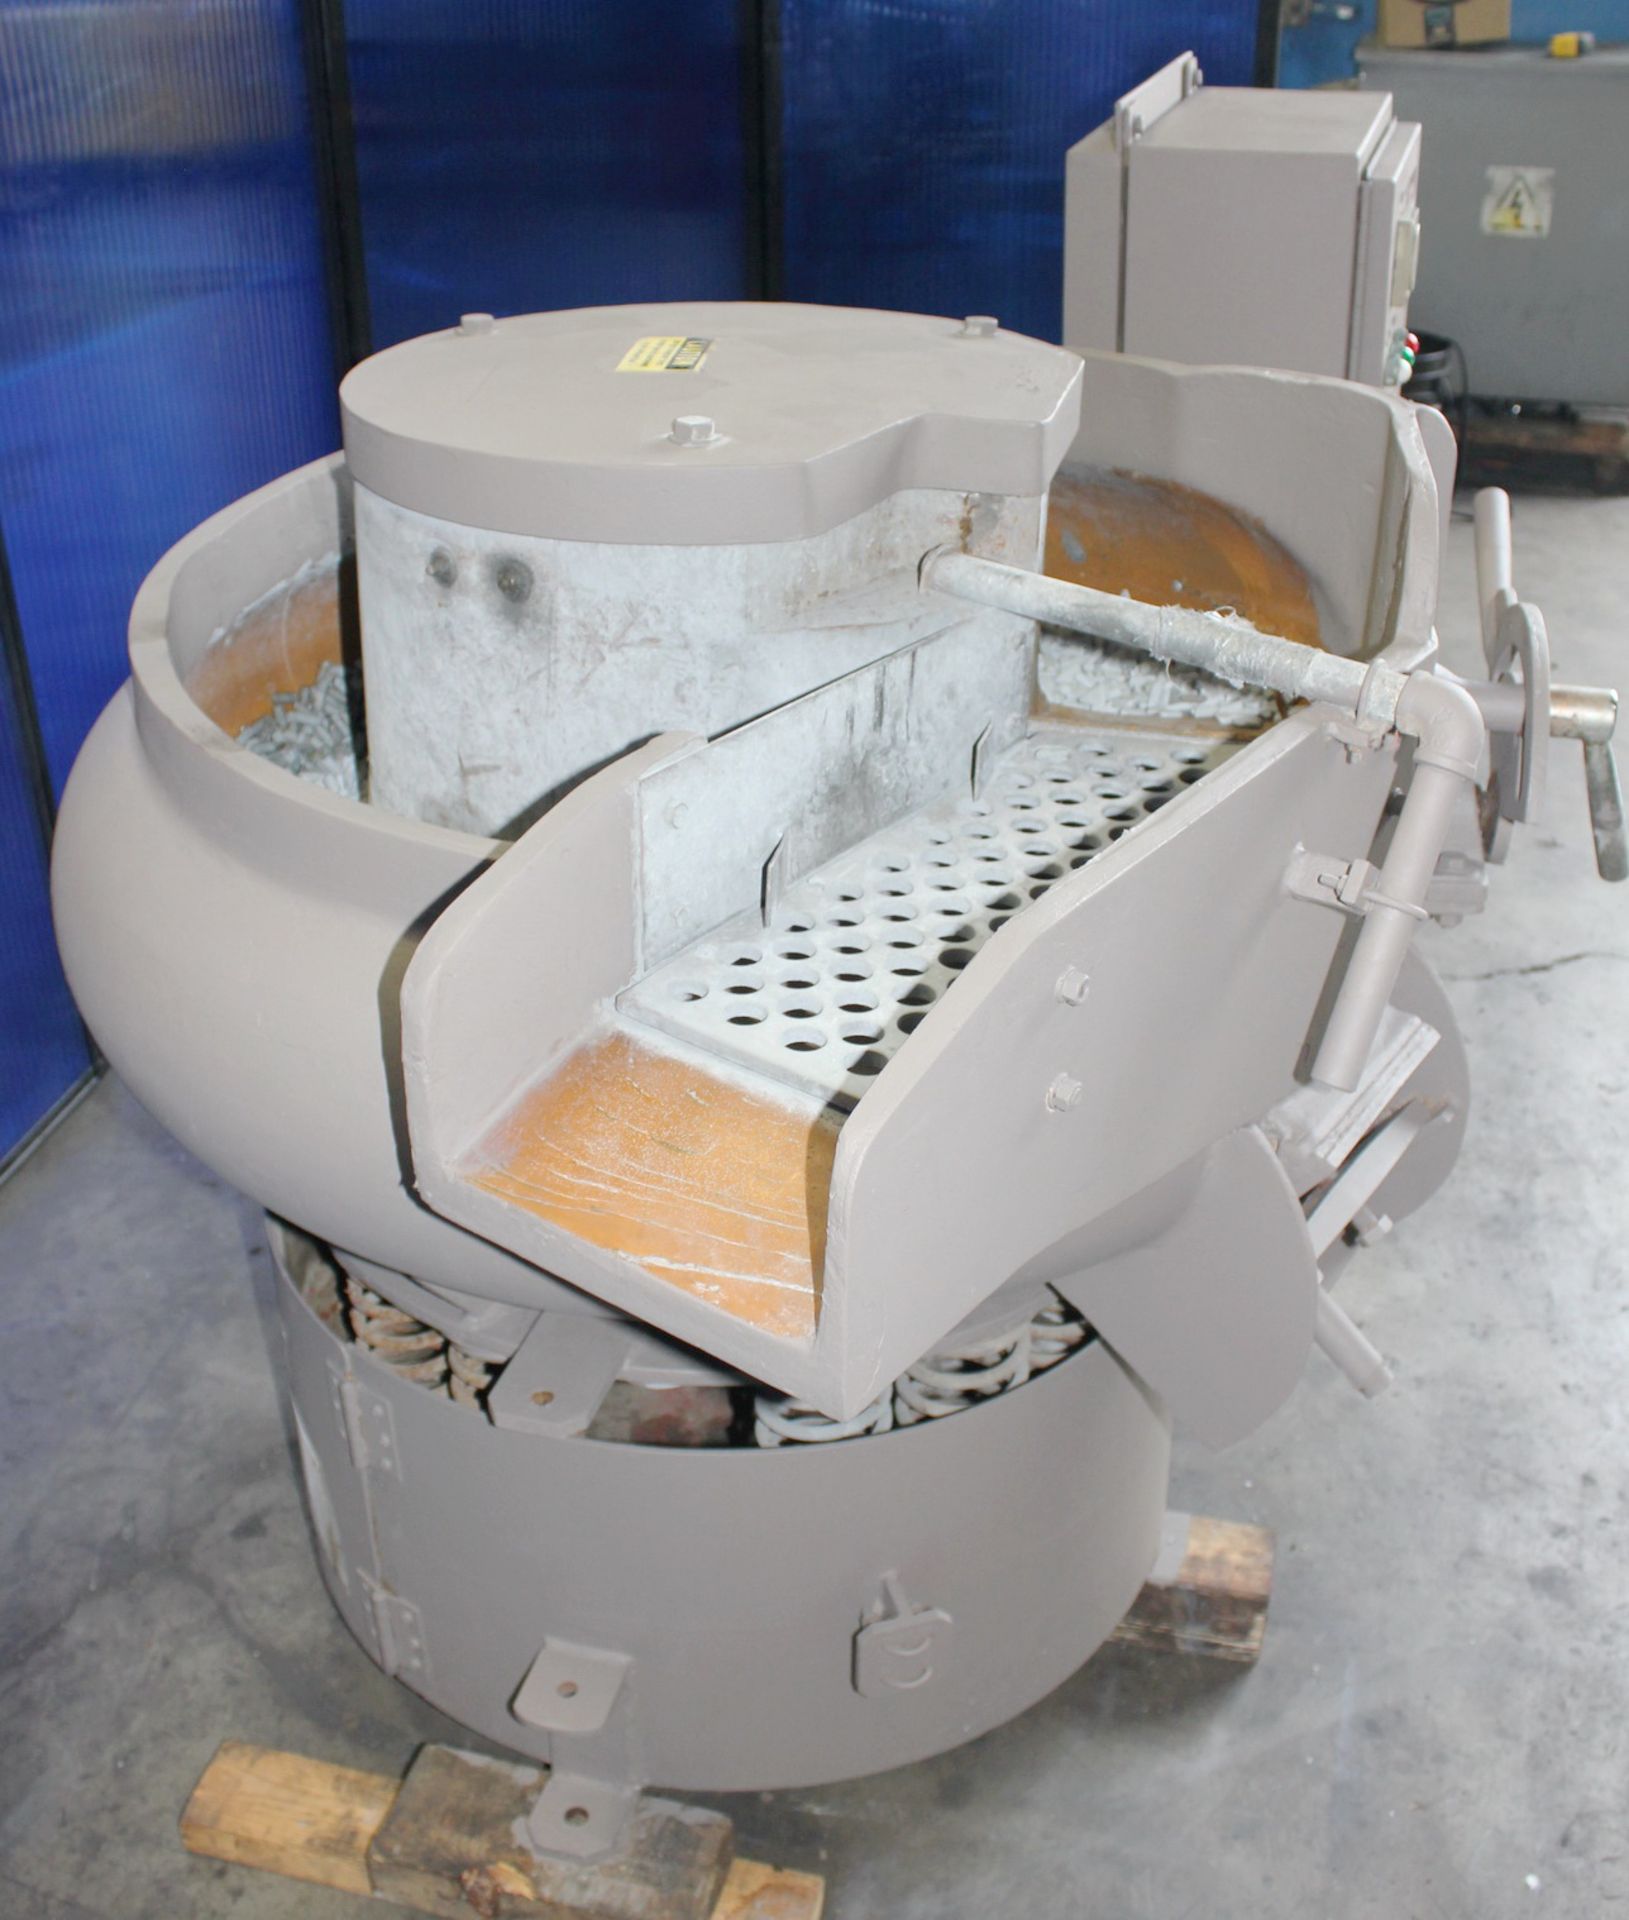 Gyromatic - Vibratory Deburring Machine (Bowl Type) | 4.5 Cubic Feet, Located In Huntington Park, CA - Image 3 of 13